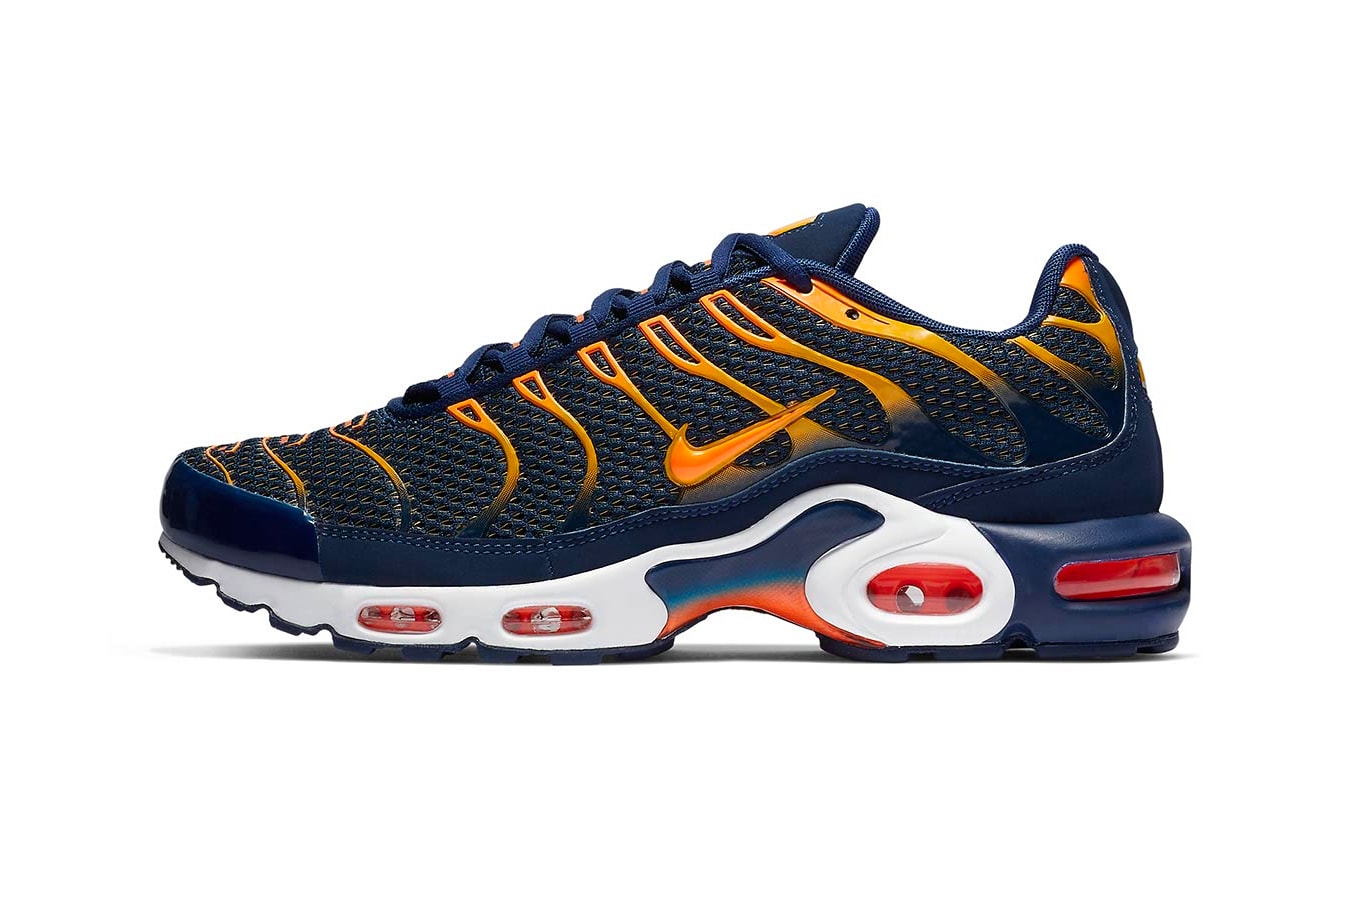 Nike Air Max Plus "Blue Void" Release Date price info Blue Void/University Gold/White/Total Orange sneaker colorway purchase stockist buy online 